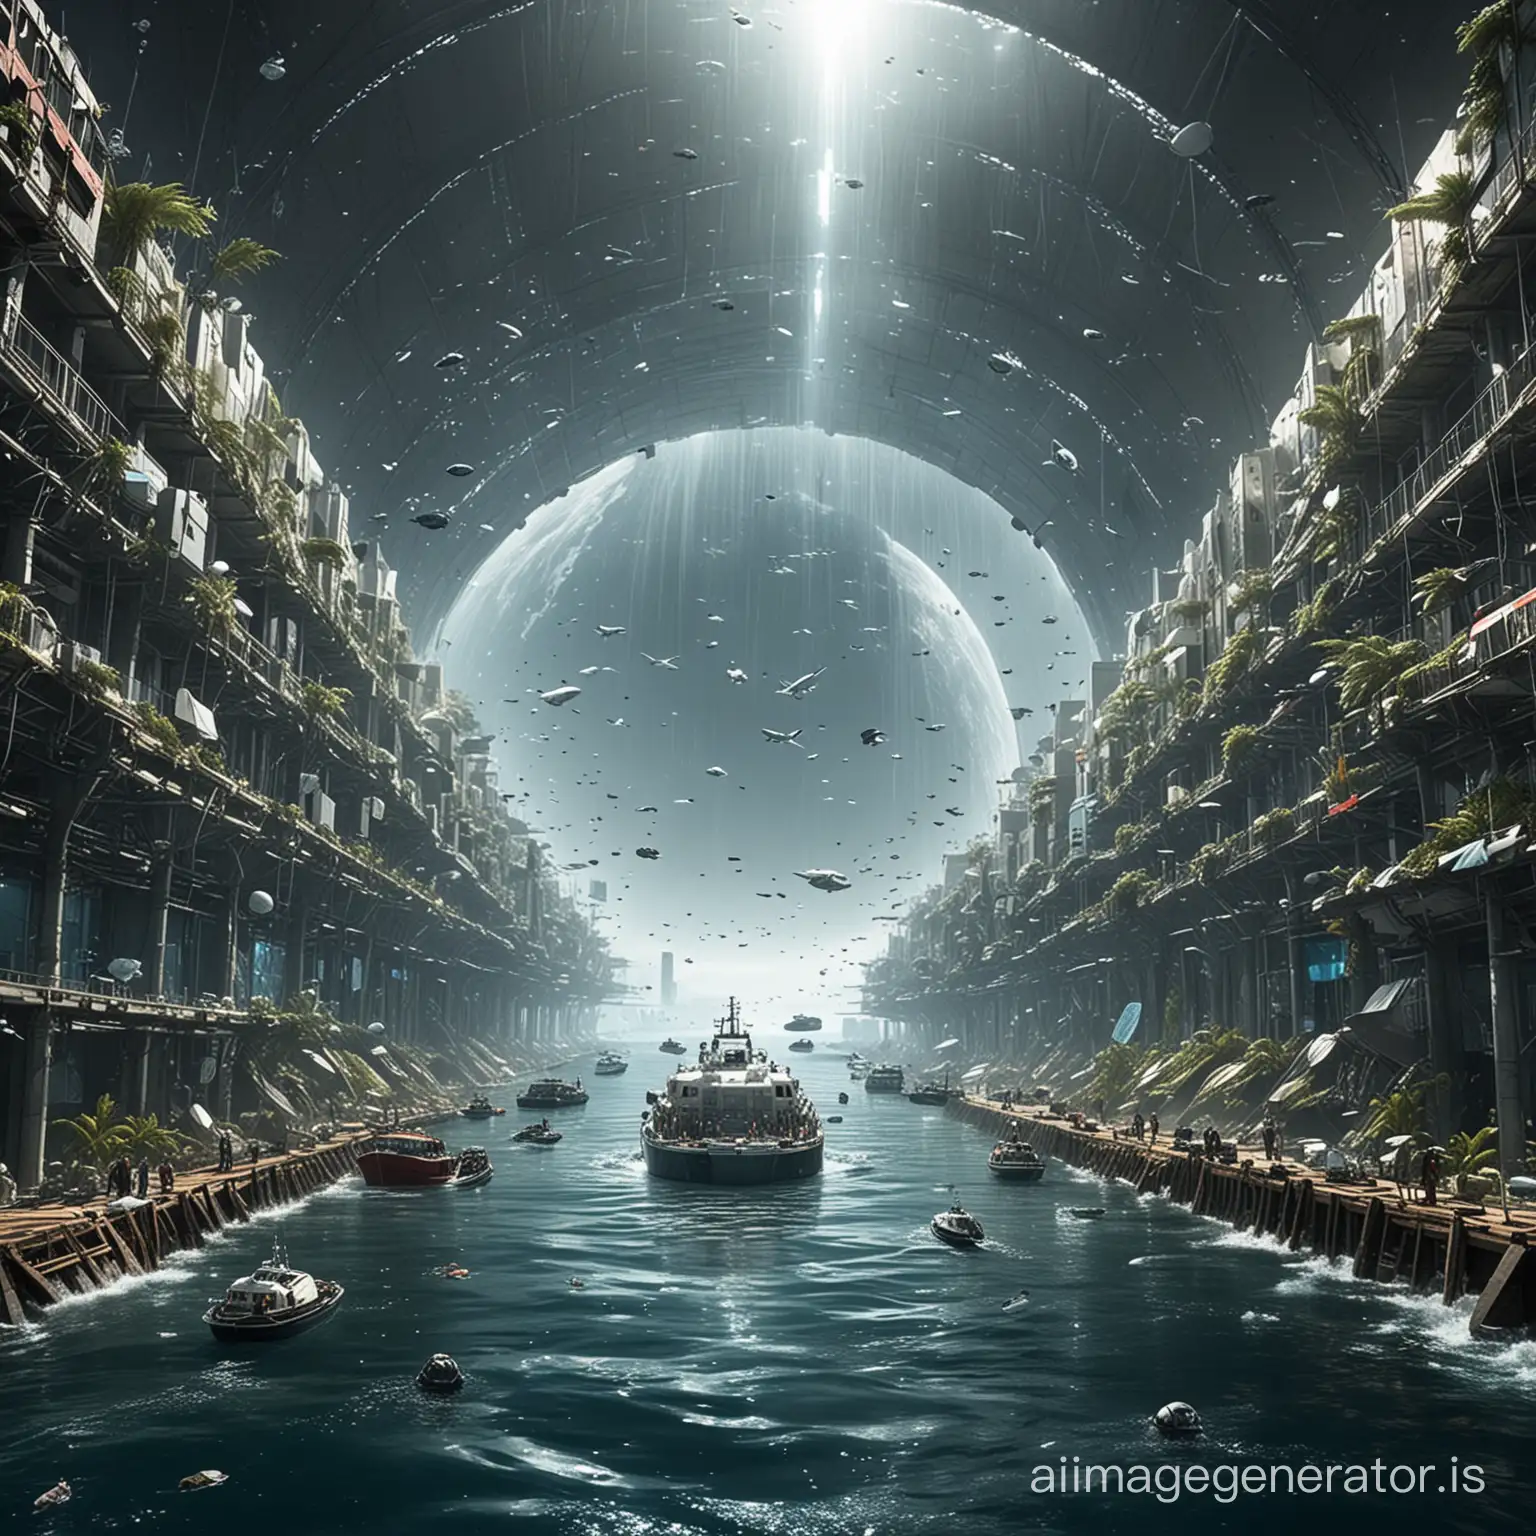 Create a city on the and in the water connected through glass tunnels and the city is built using spacecraft, incorporating garbage from the Great Pacific Garbage Patch. Prioritize realism and livability, avoiding vertical structures. Plan horizontally both in and out of the water, with a circular layout. Emphasize the use of spaceships in the design.